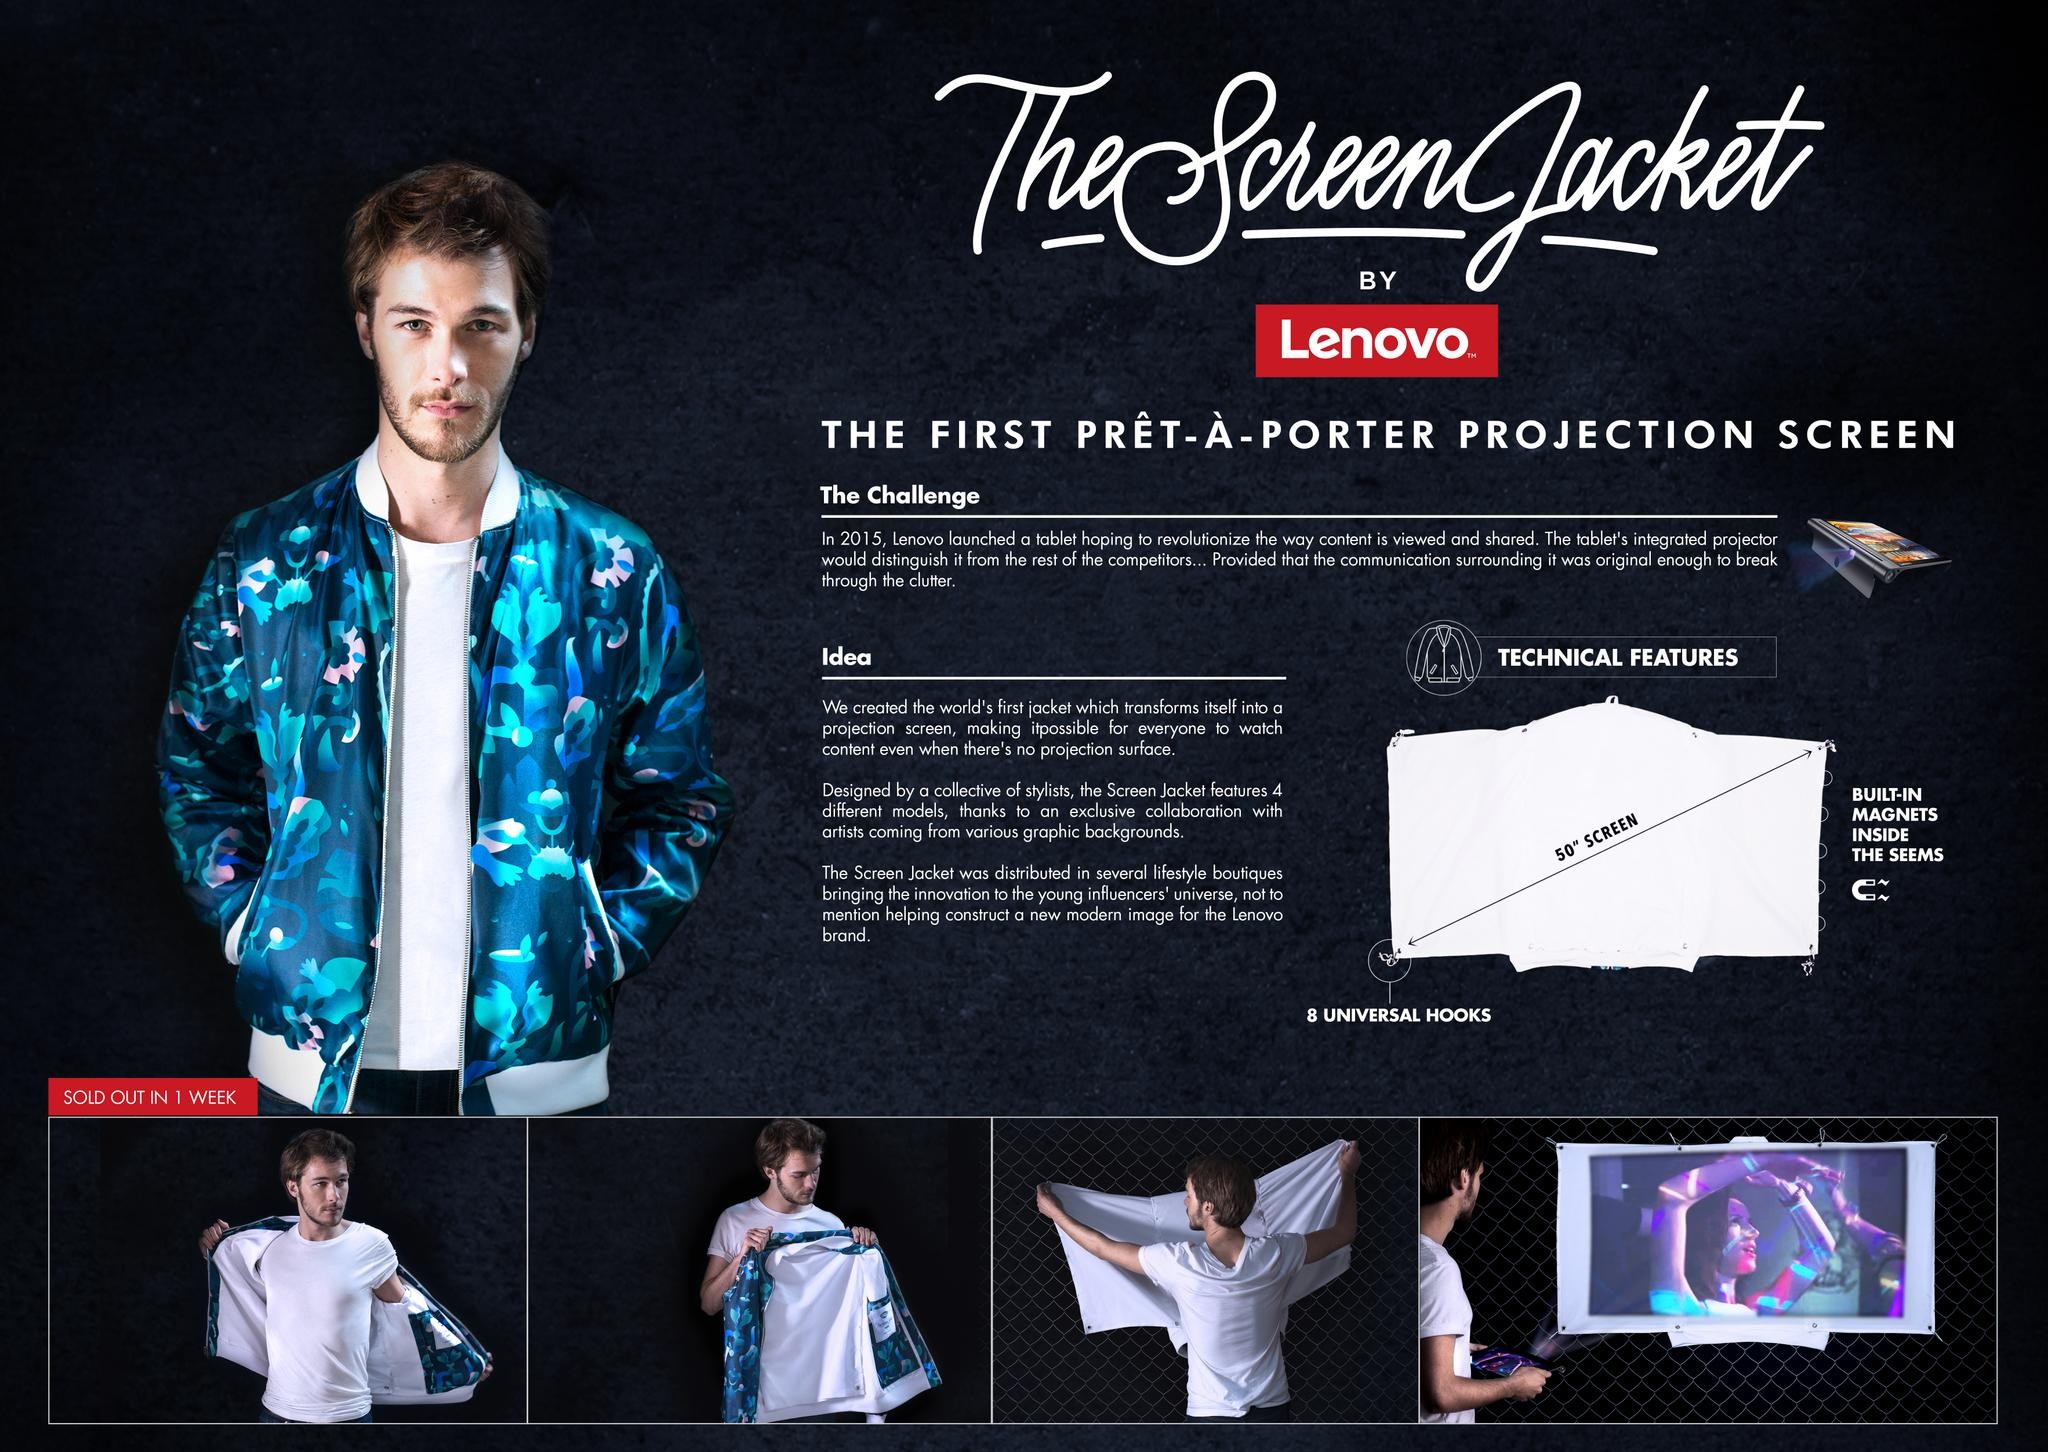 THE SCREEN JACKET